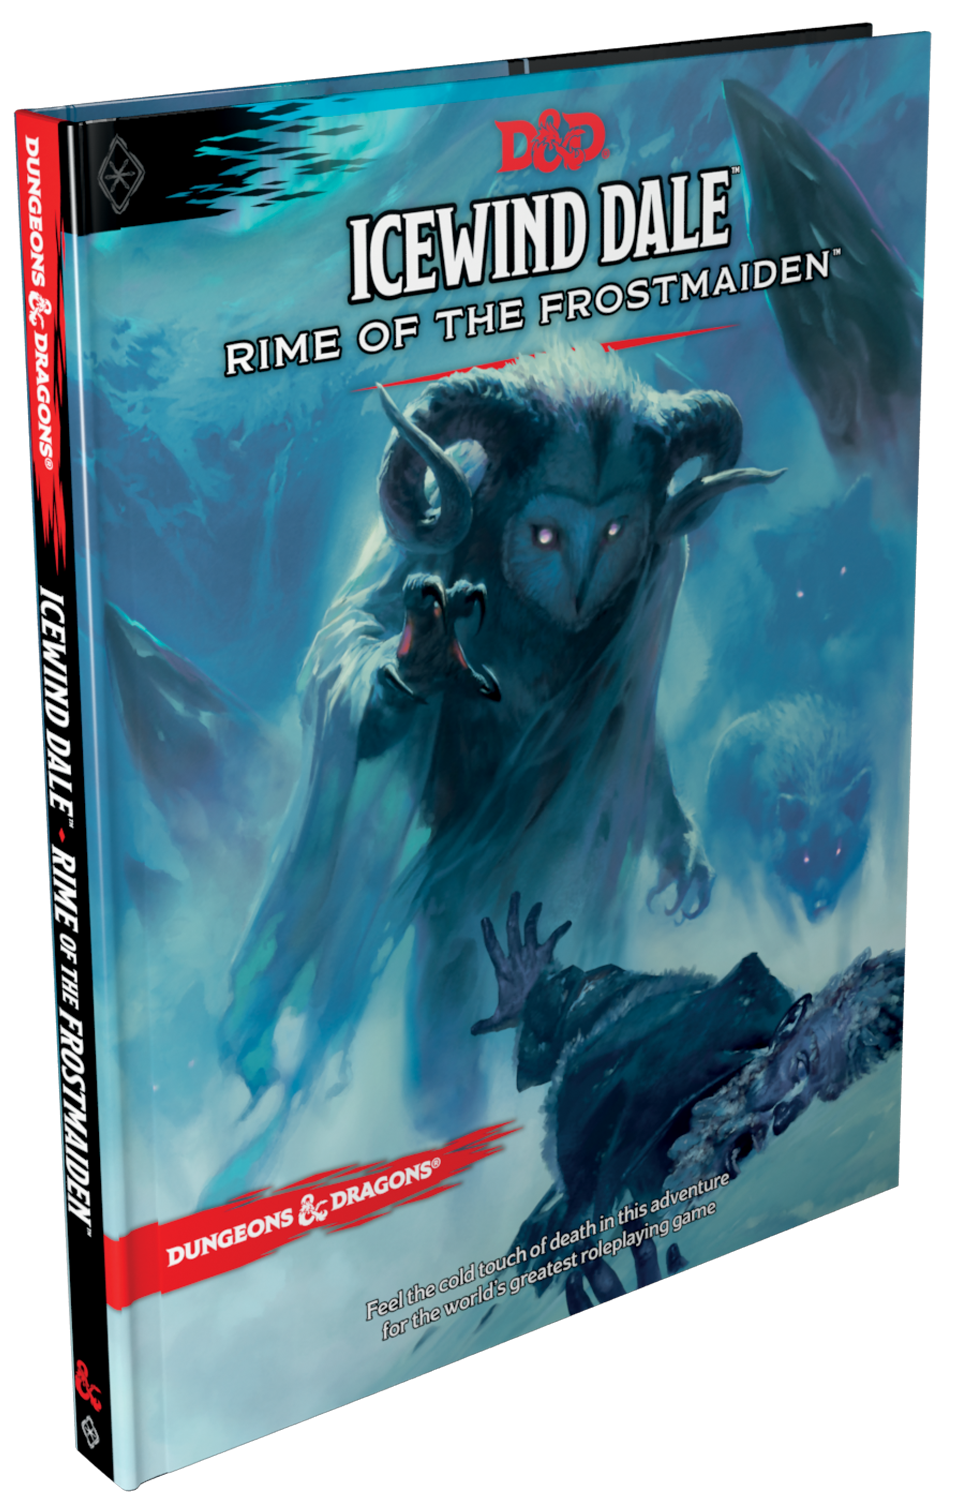 Rental - D&D - Icewind Dale: Rime of the Frostmaiden